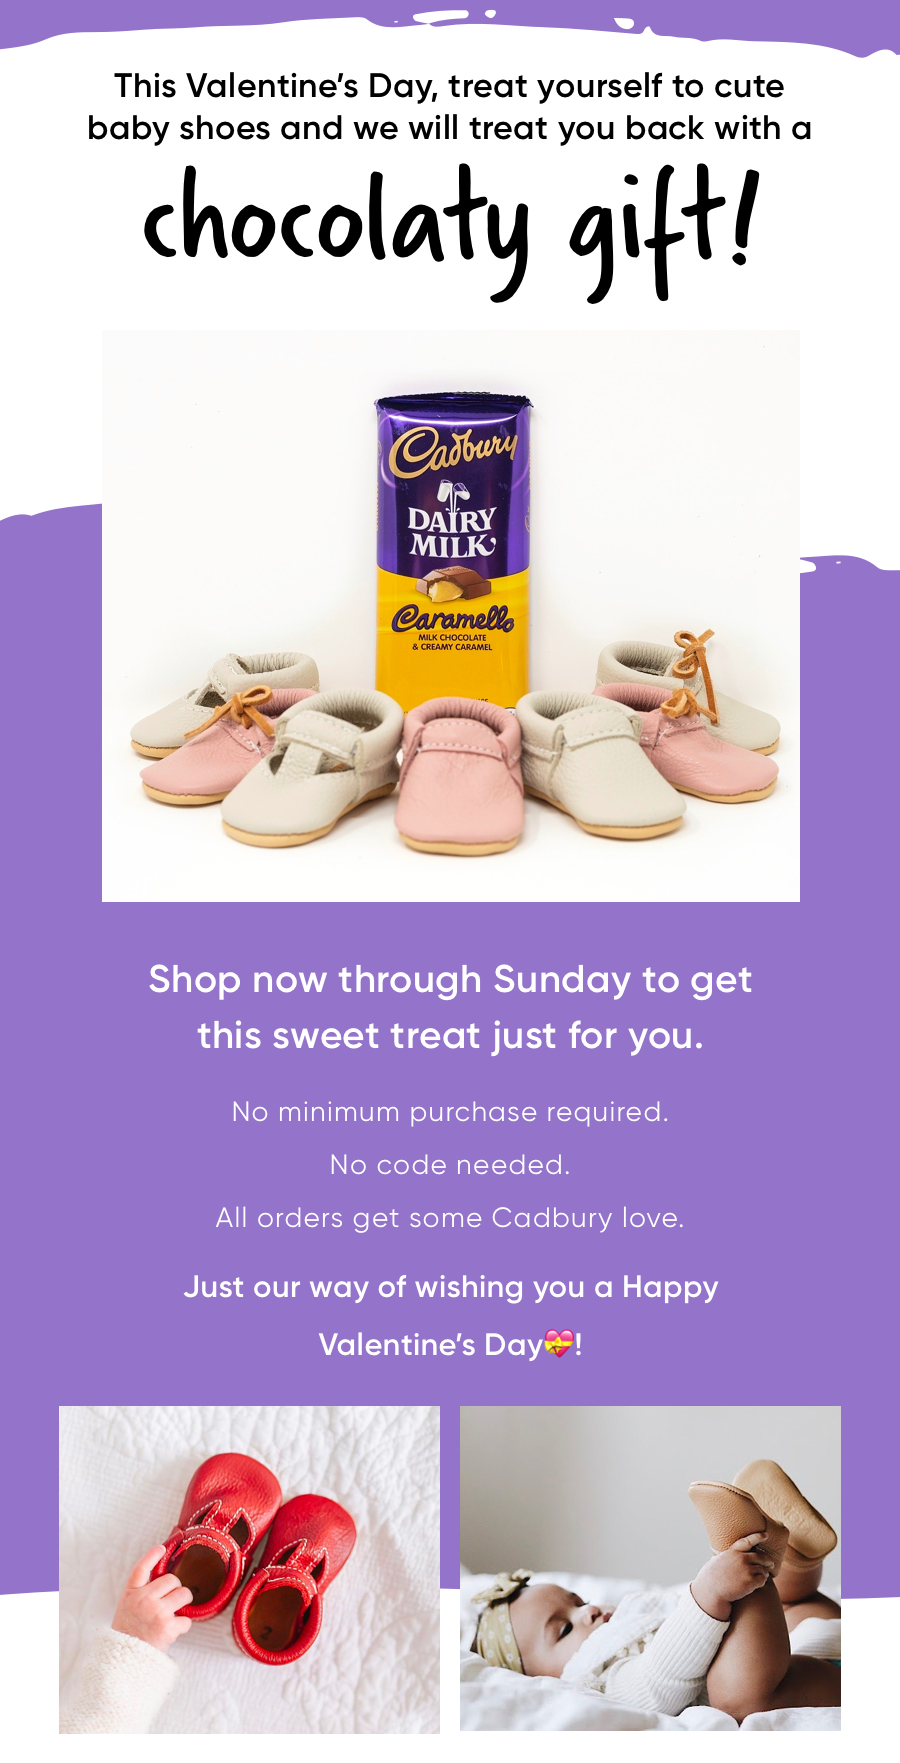 There's nothing better than buying cute shoes and getting Free Chocolate!